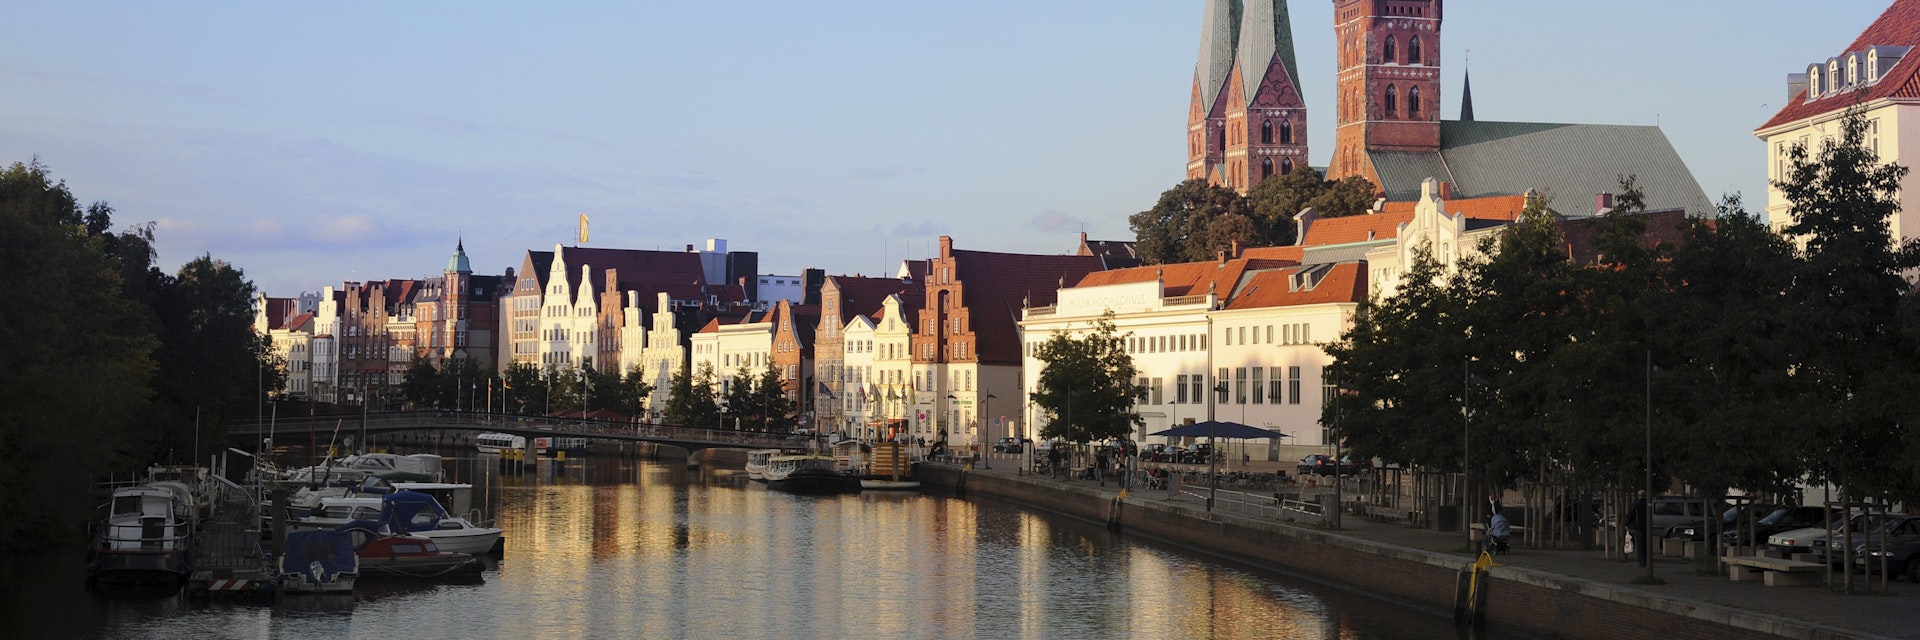 Hanseatic city of Lubeck on Trave River.